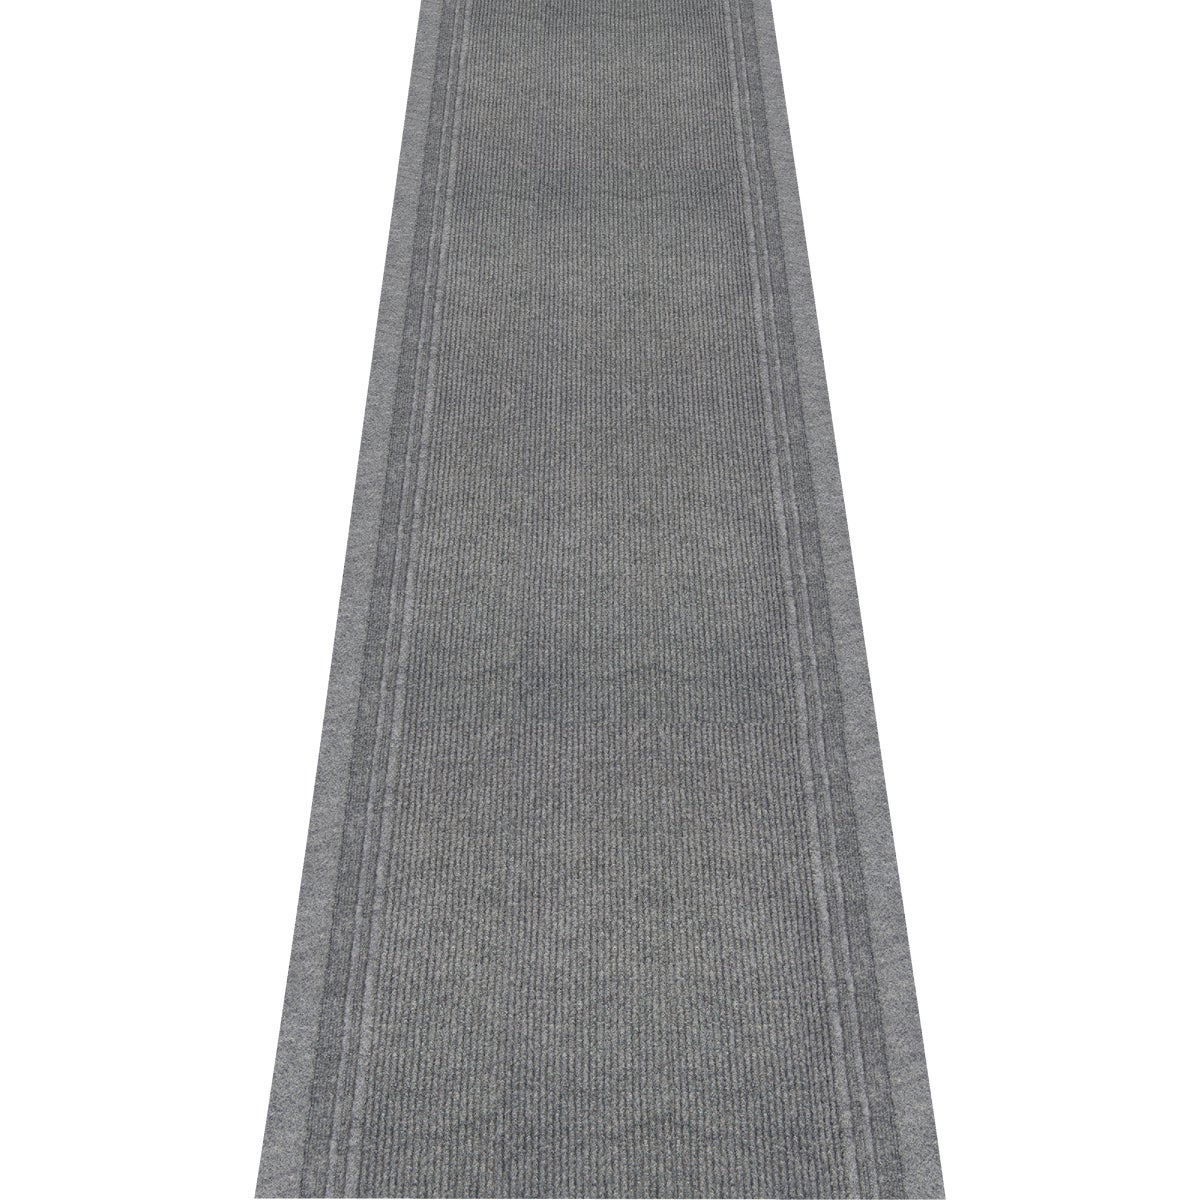 Item 278963, 100% polypropylene ribbed runner with bordered pattern.